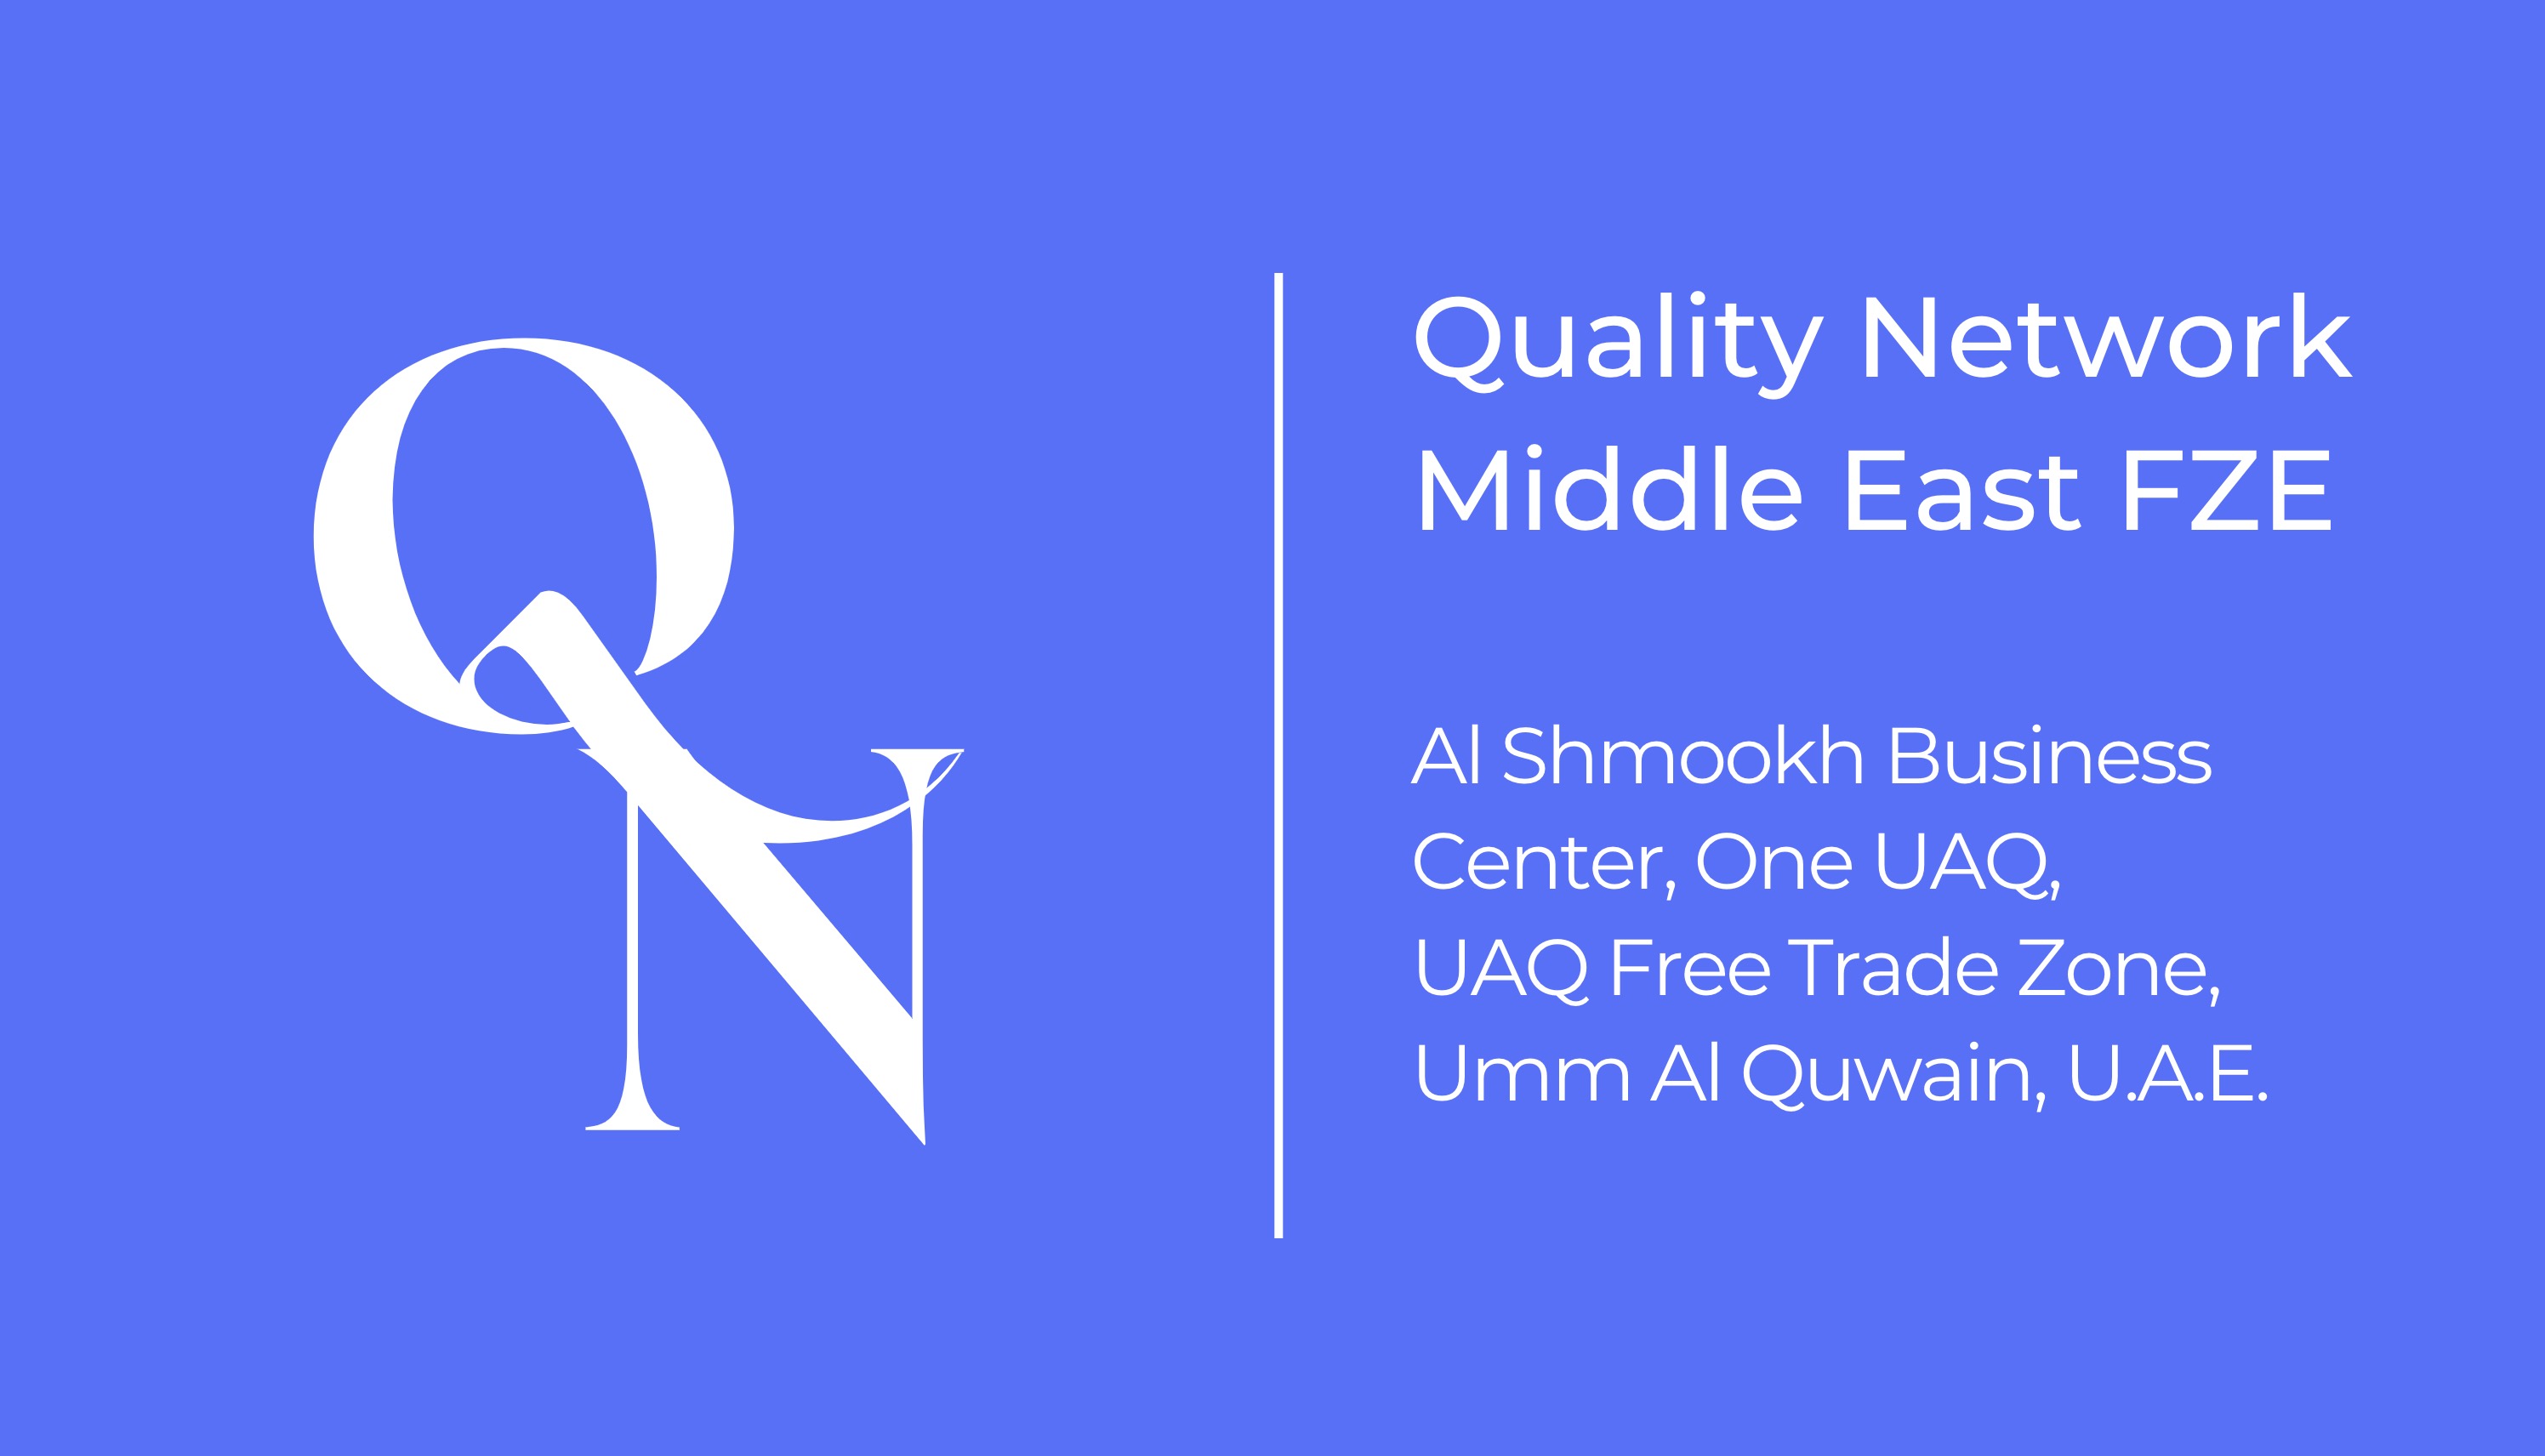 Quality Network Middle East FZE